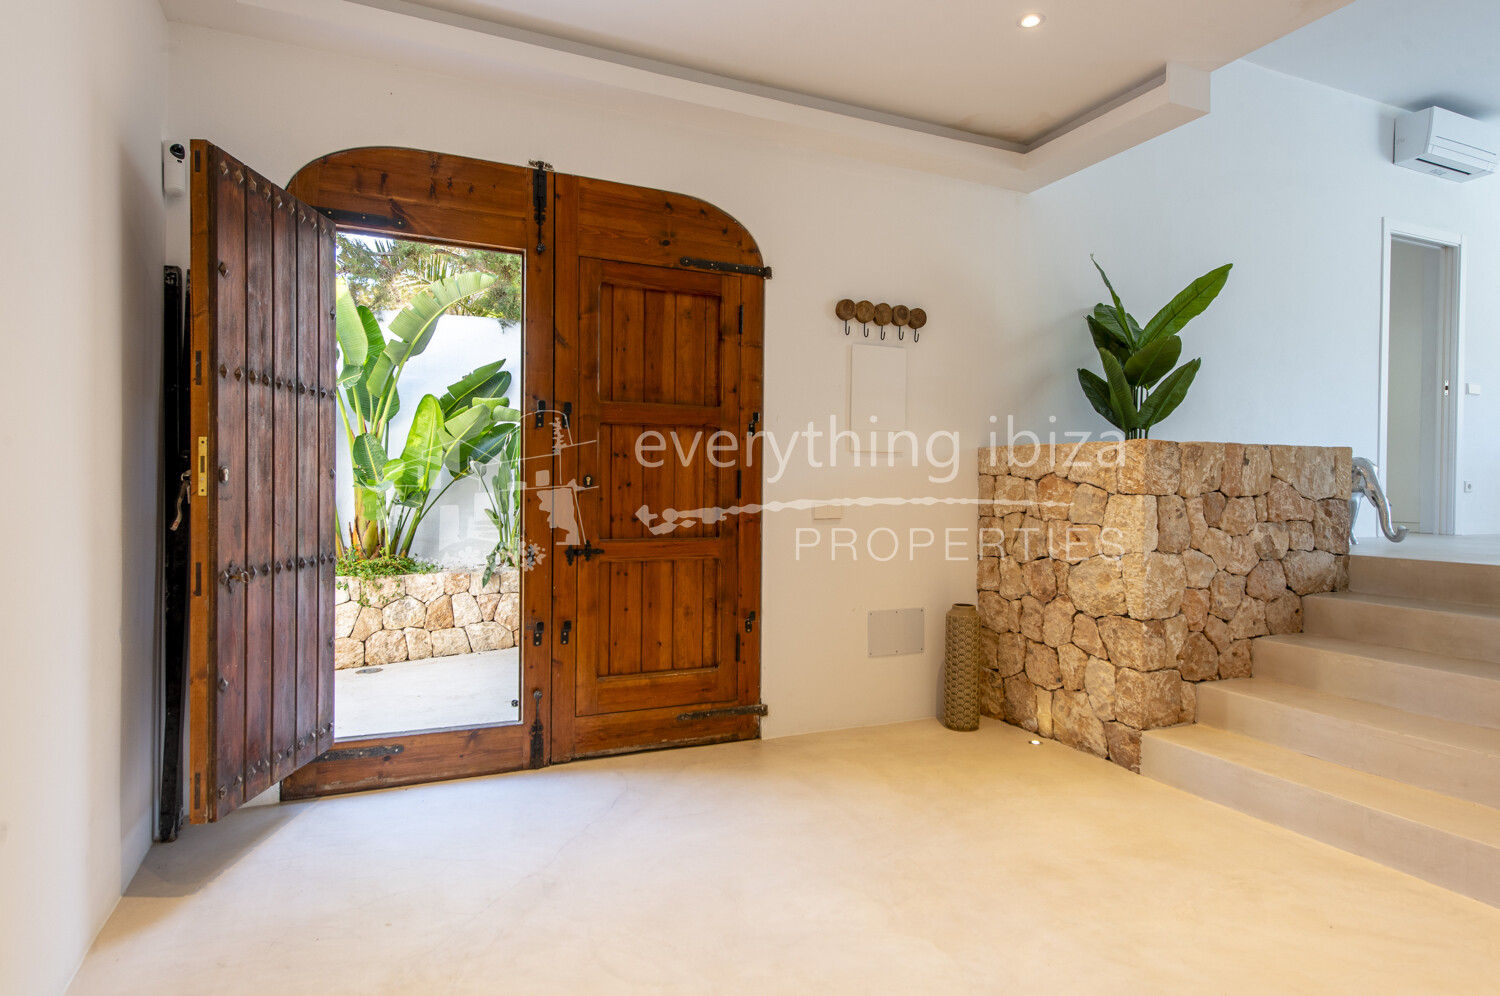 Stylish Contemporary Villa in Peaceful Setting near Beach with Sea and Sunset Views, ref. 1692, for sale in Ibiza by everything ibiza Properties